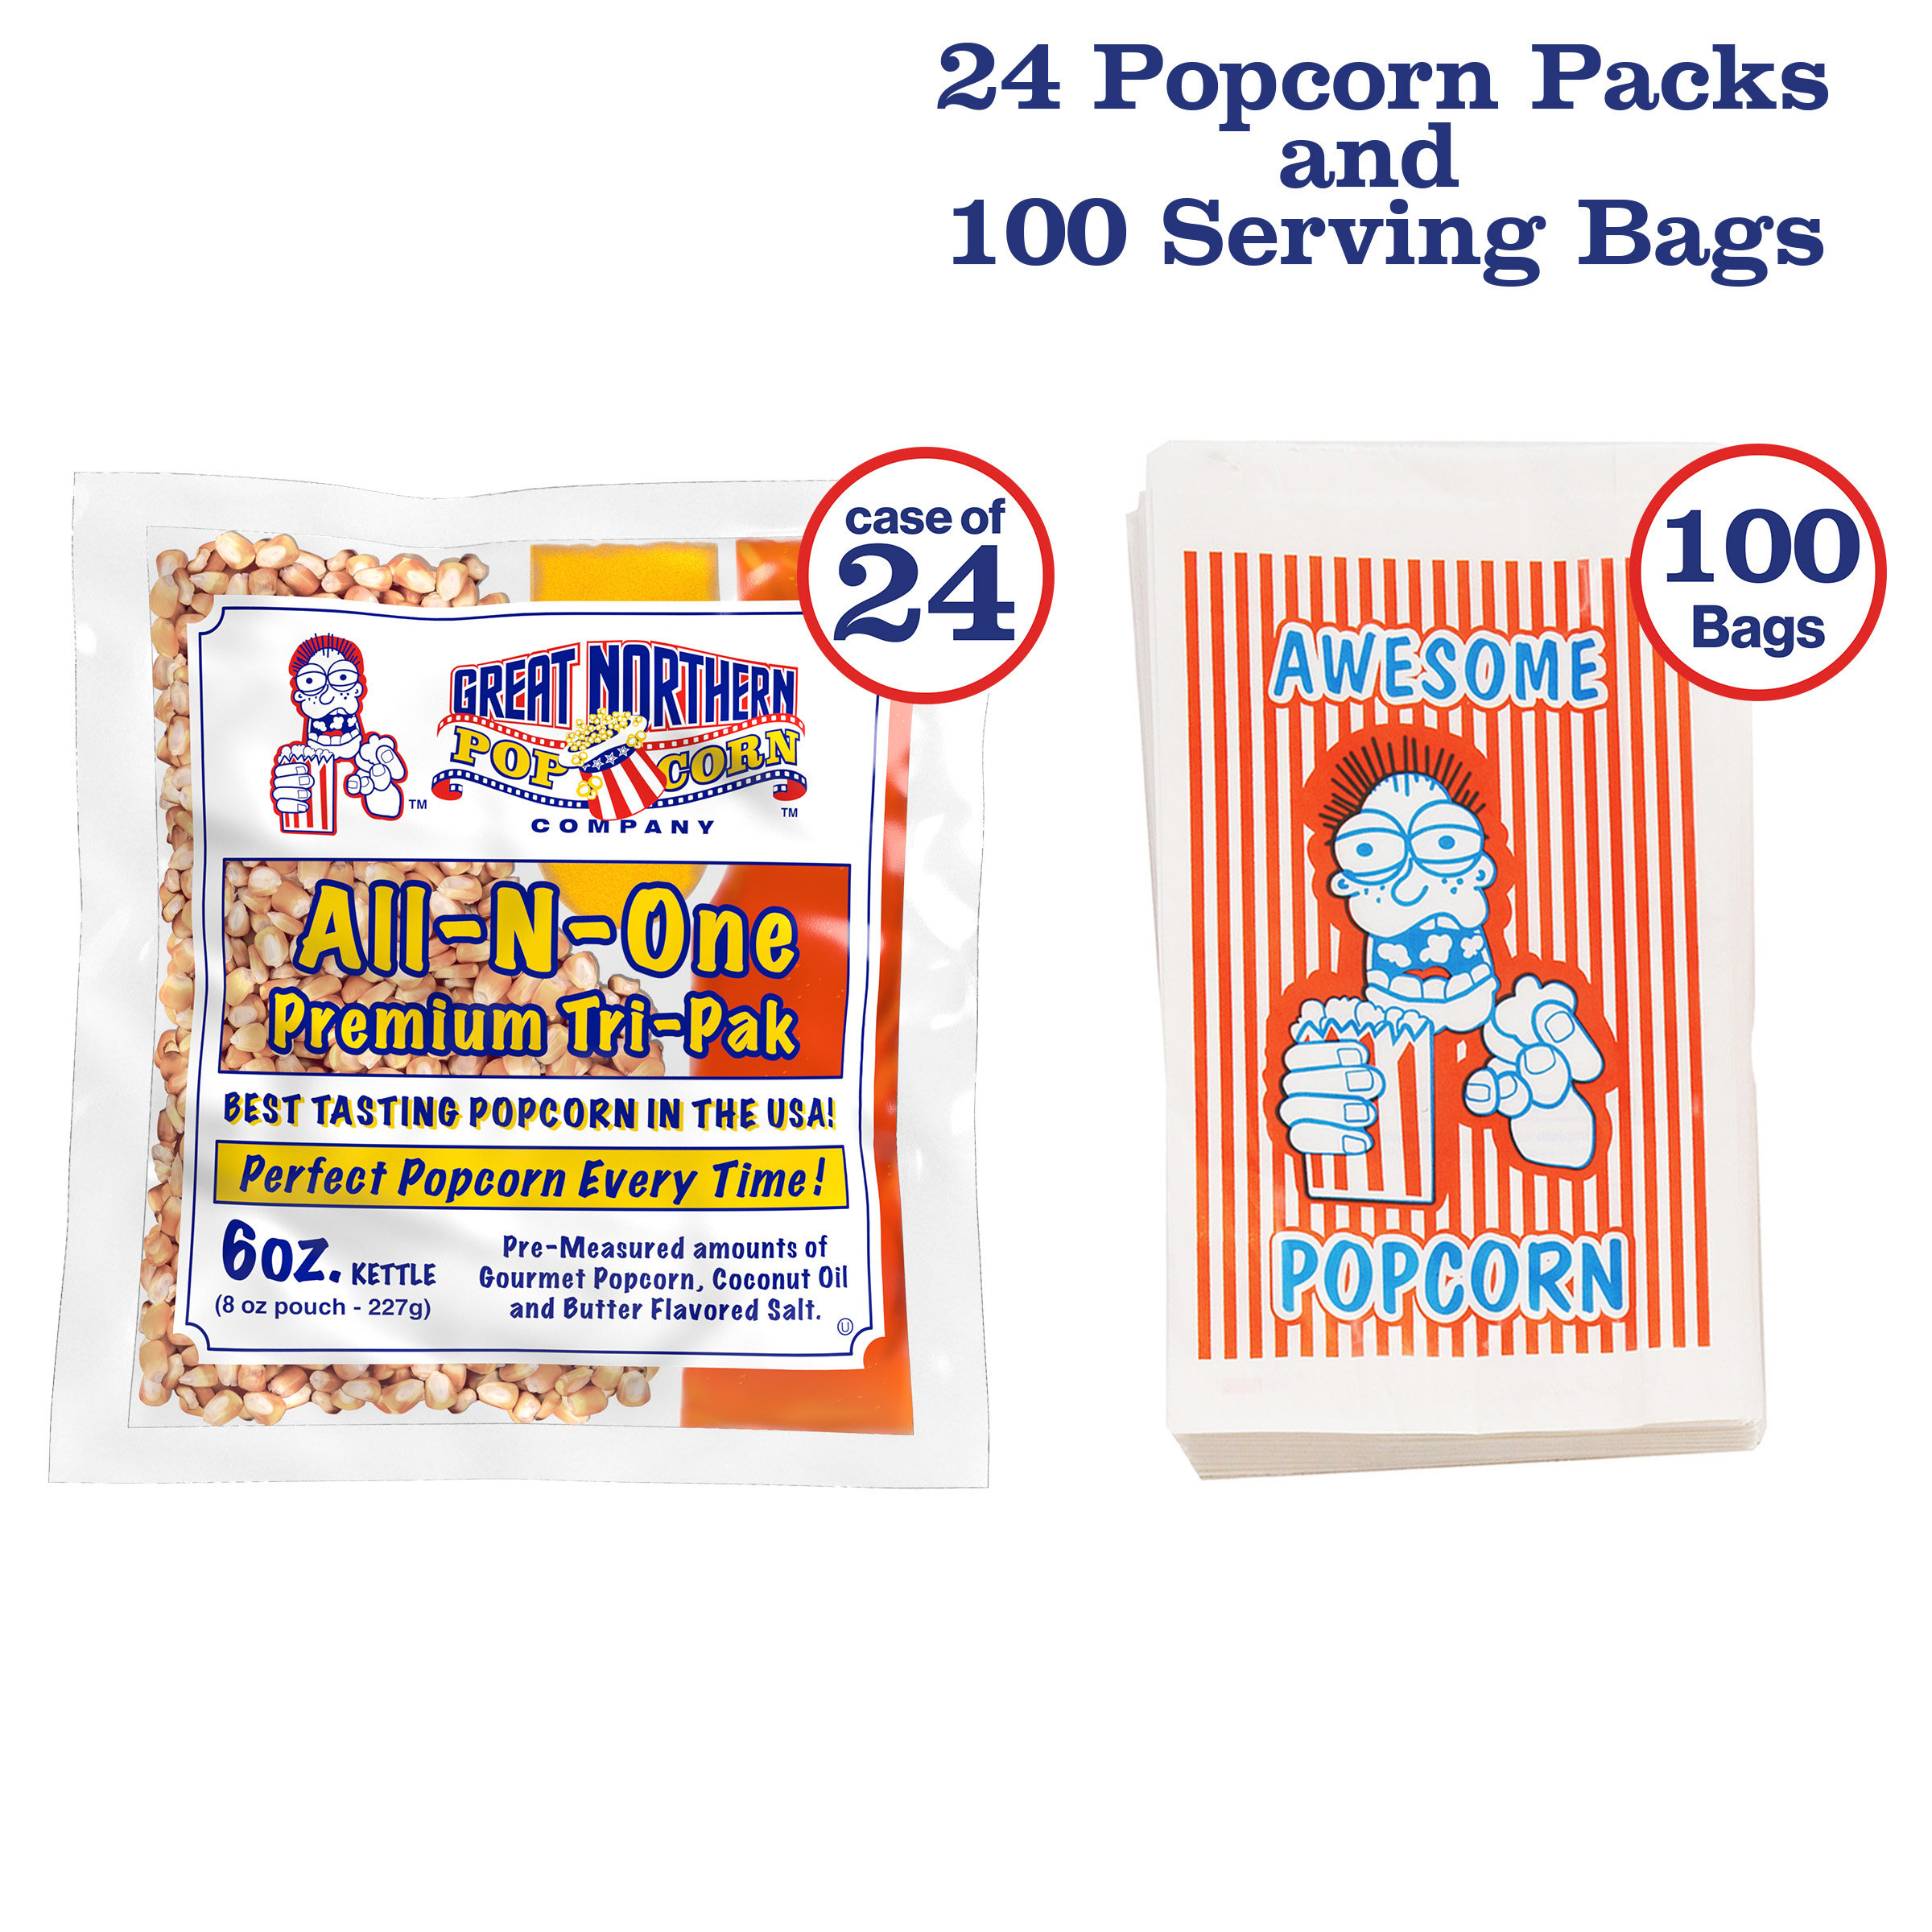 GREAT NORTHERN POPCORN COMPANY - Popcorn Packs, Pre-Measured, Movie Theater  Style, All-in-One Kernel, Salt, Oil Packets for Popcorn Machines, 8 Ounce